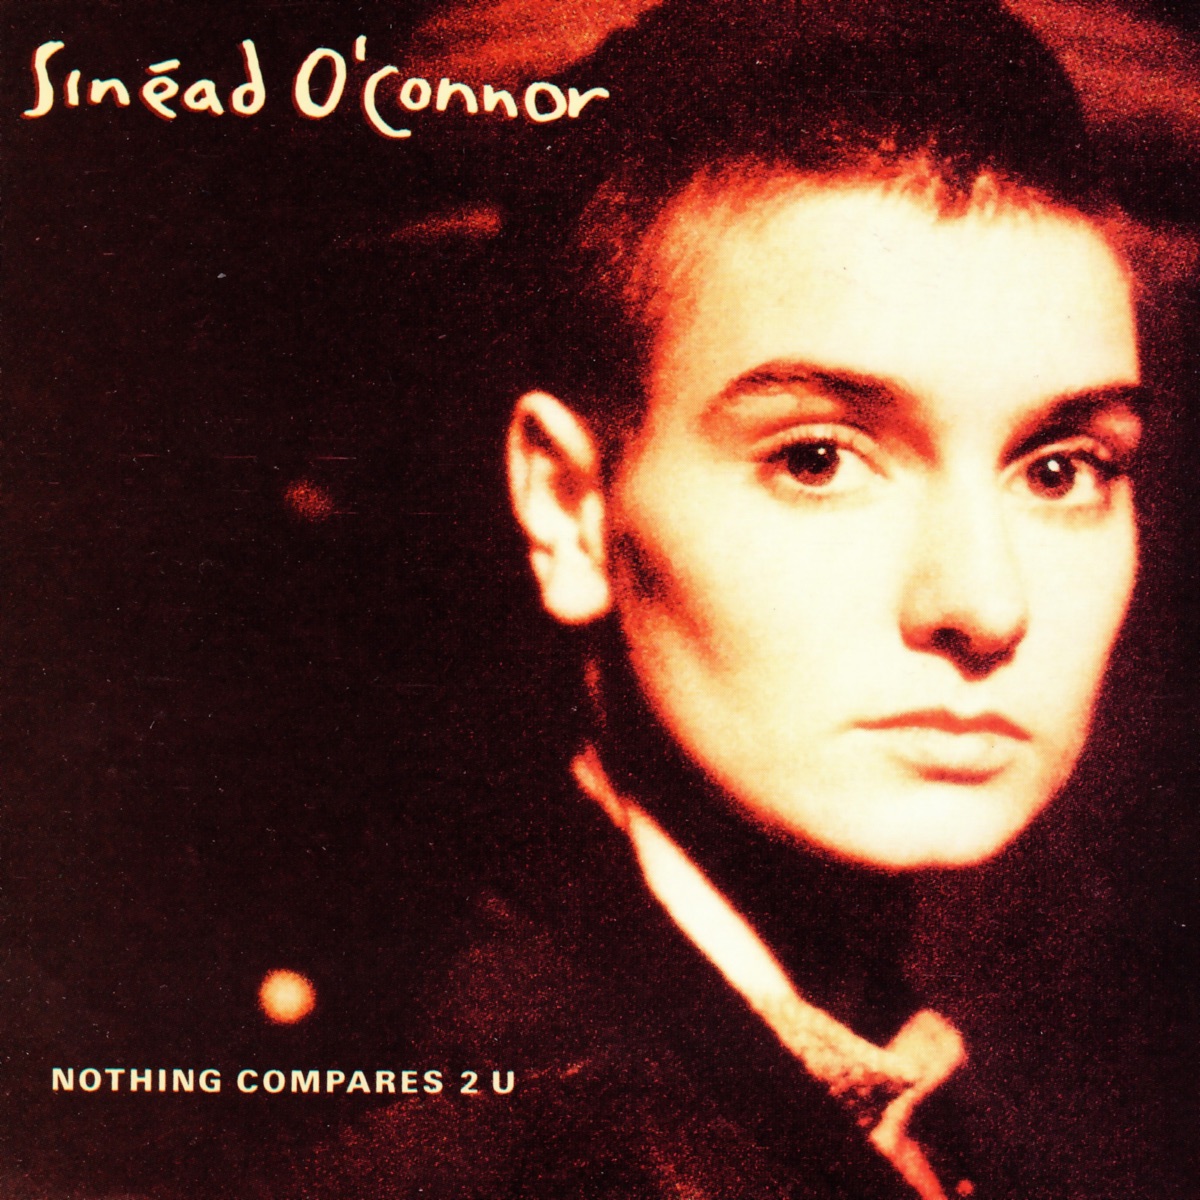 Nothing Compares 2 U - Single by Sinéad O'Connor on Apple Music